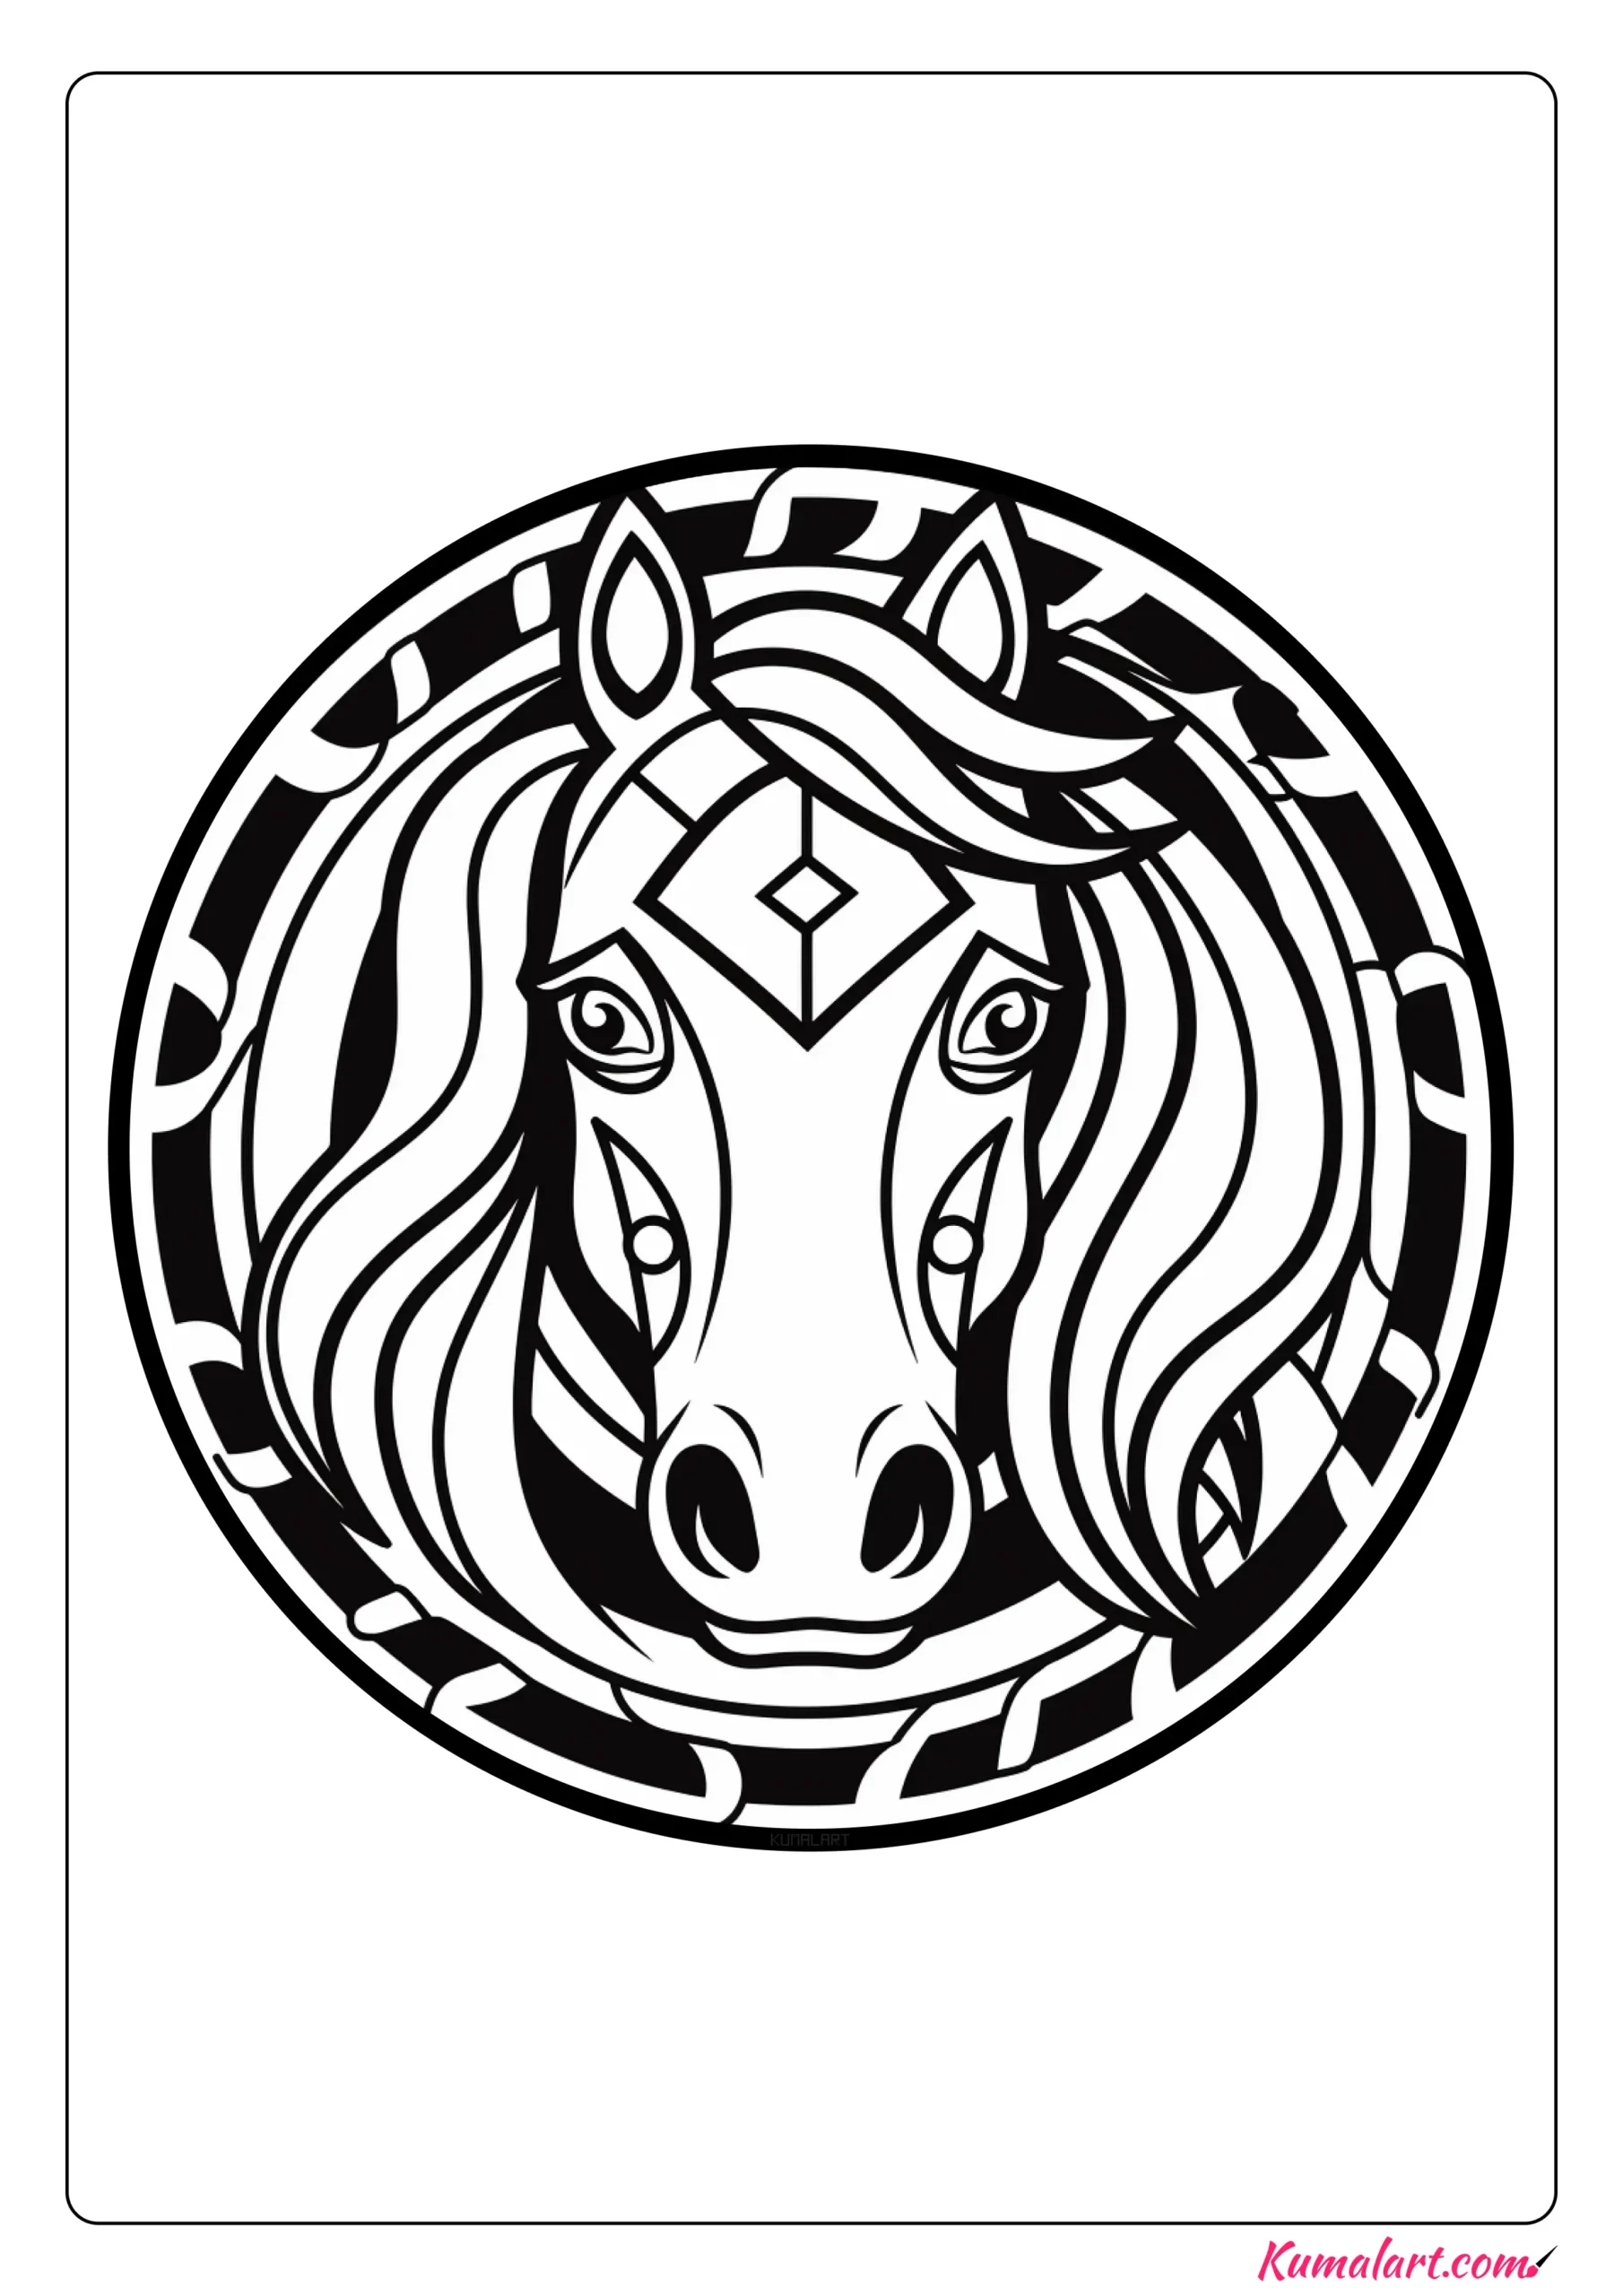 Felix the Horse Coloring Page